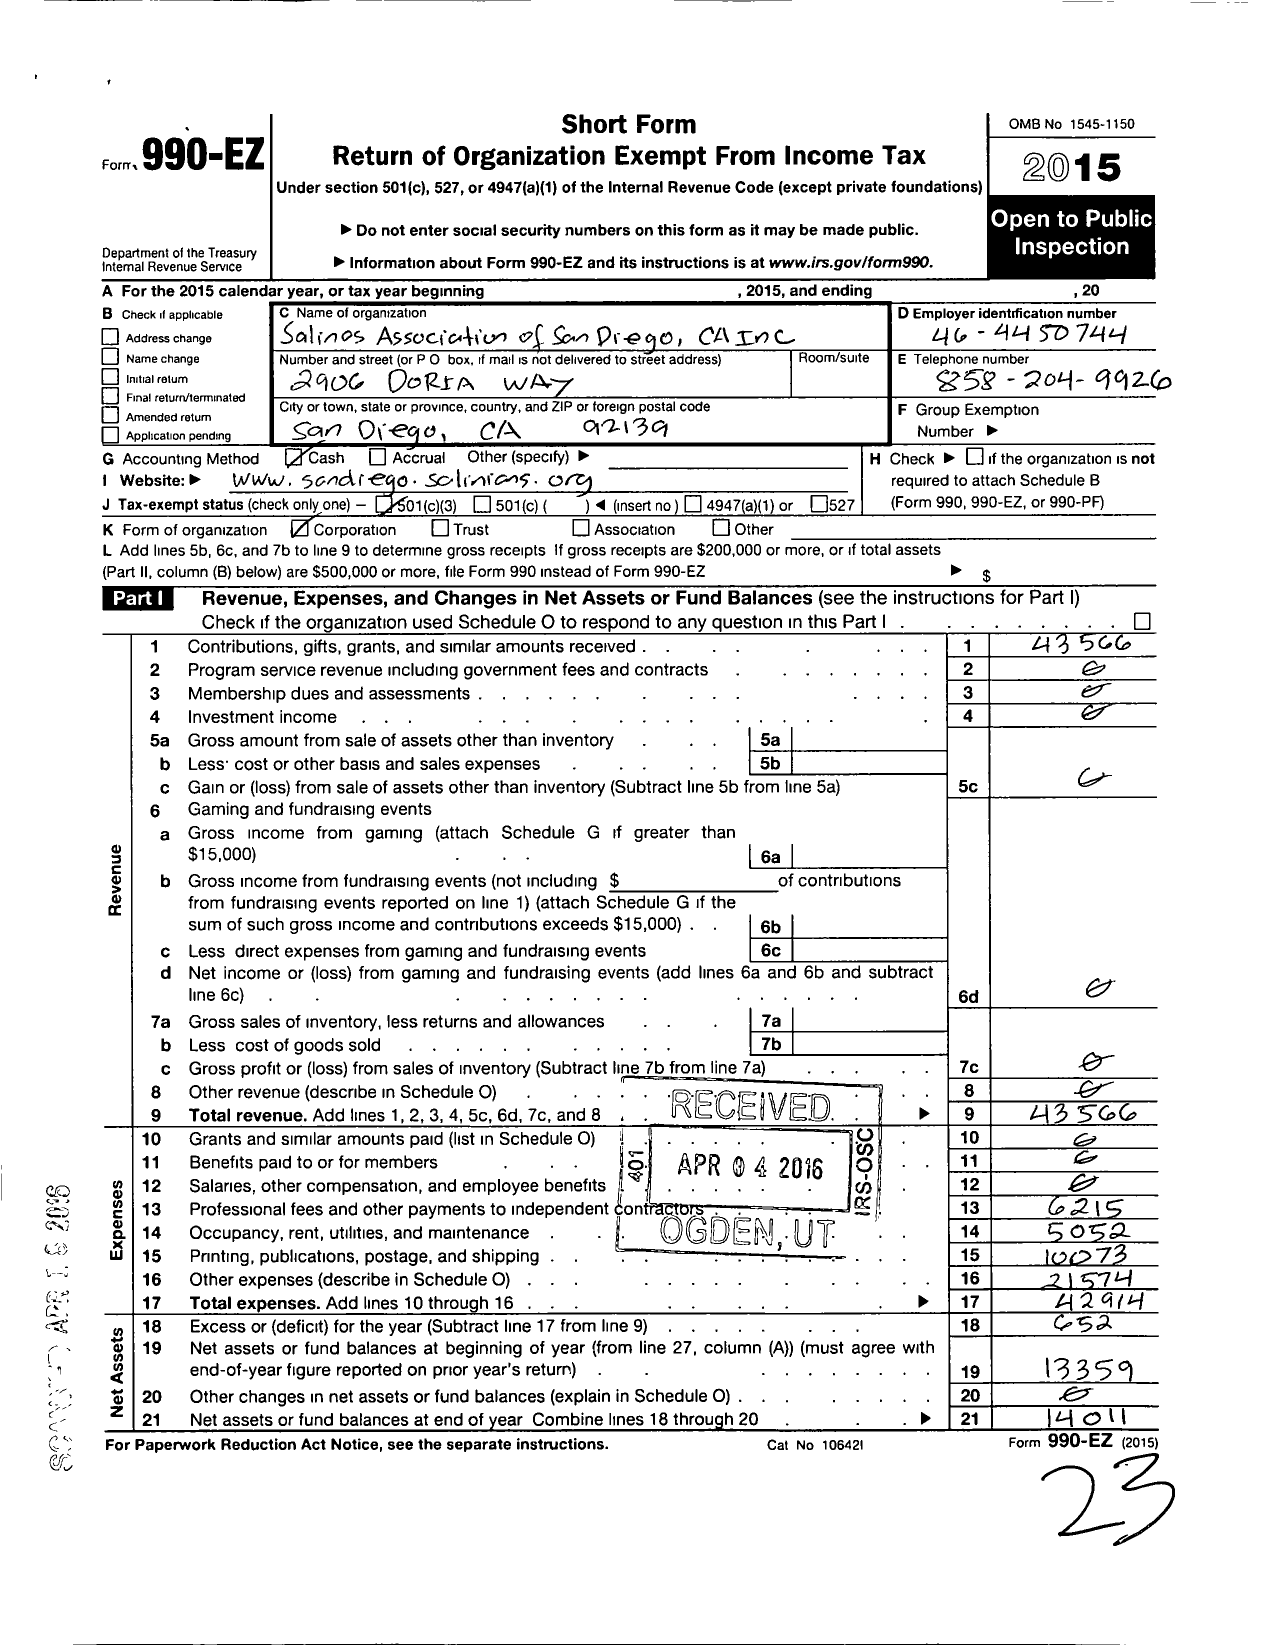 Image of first page of 2015 Form 990EZ for Salinas Association of San Diego Ca